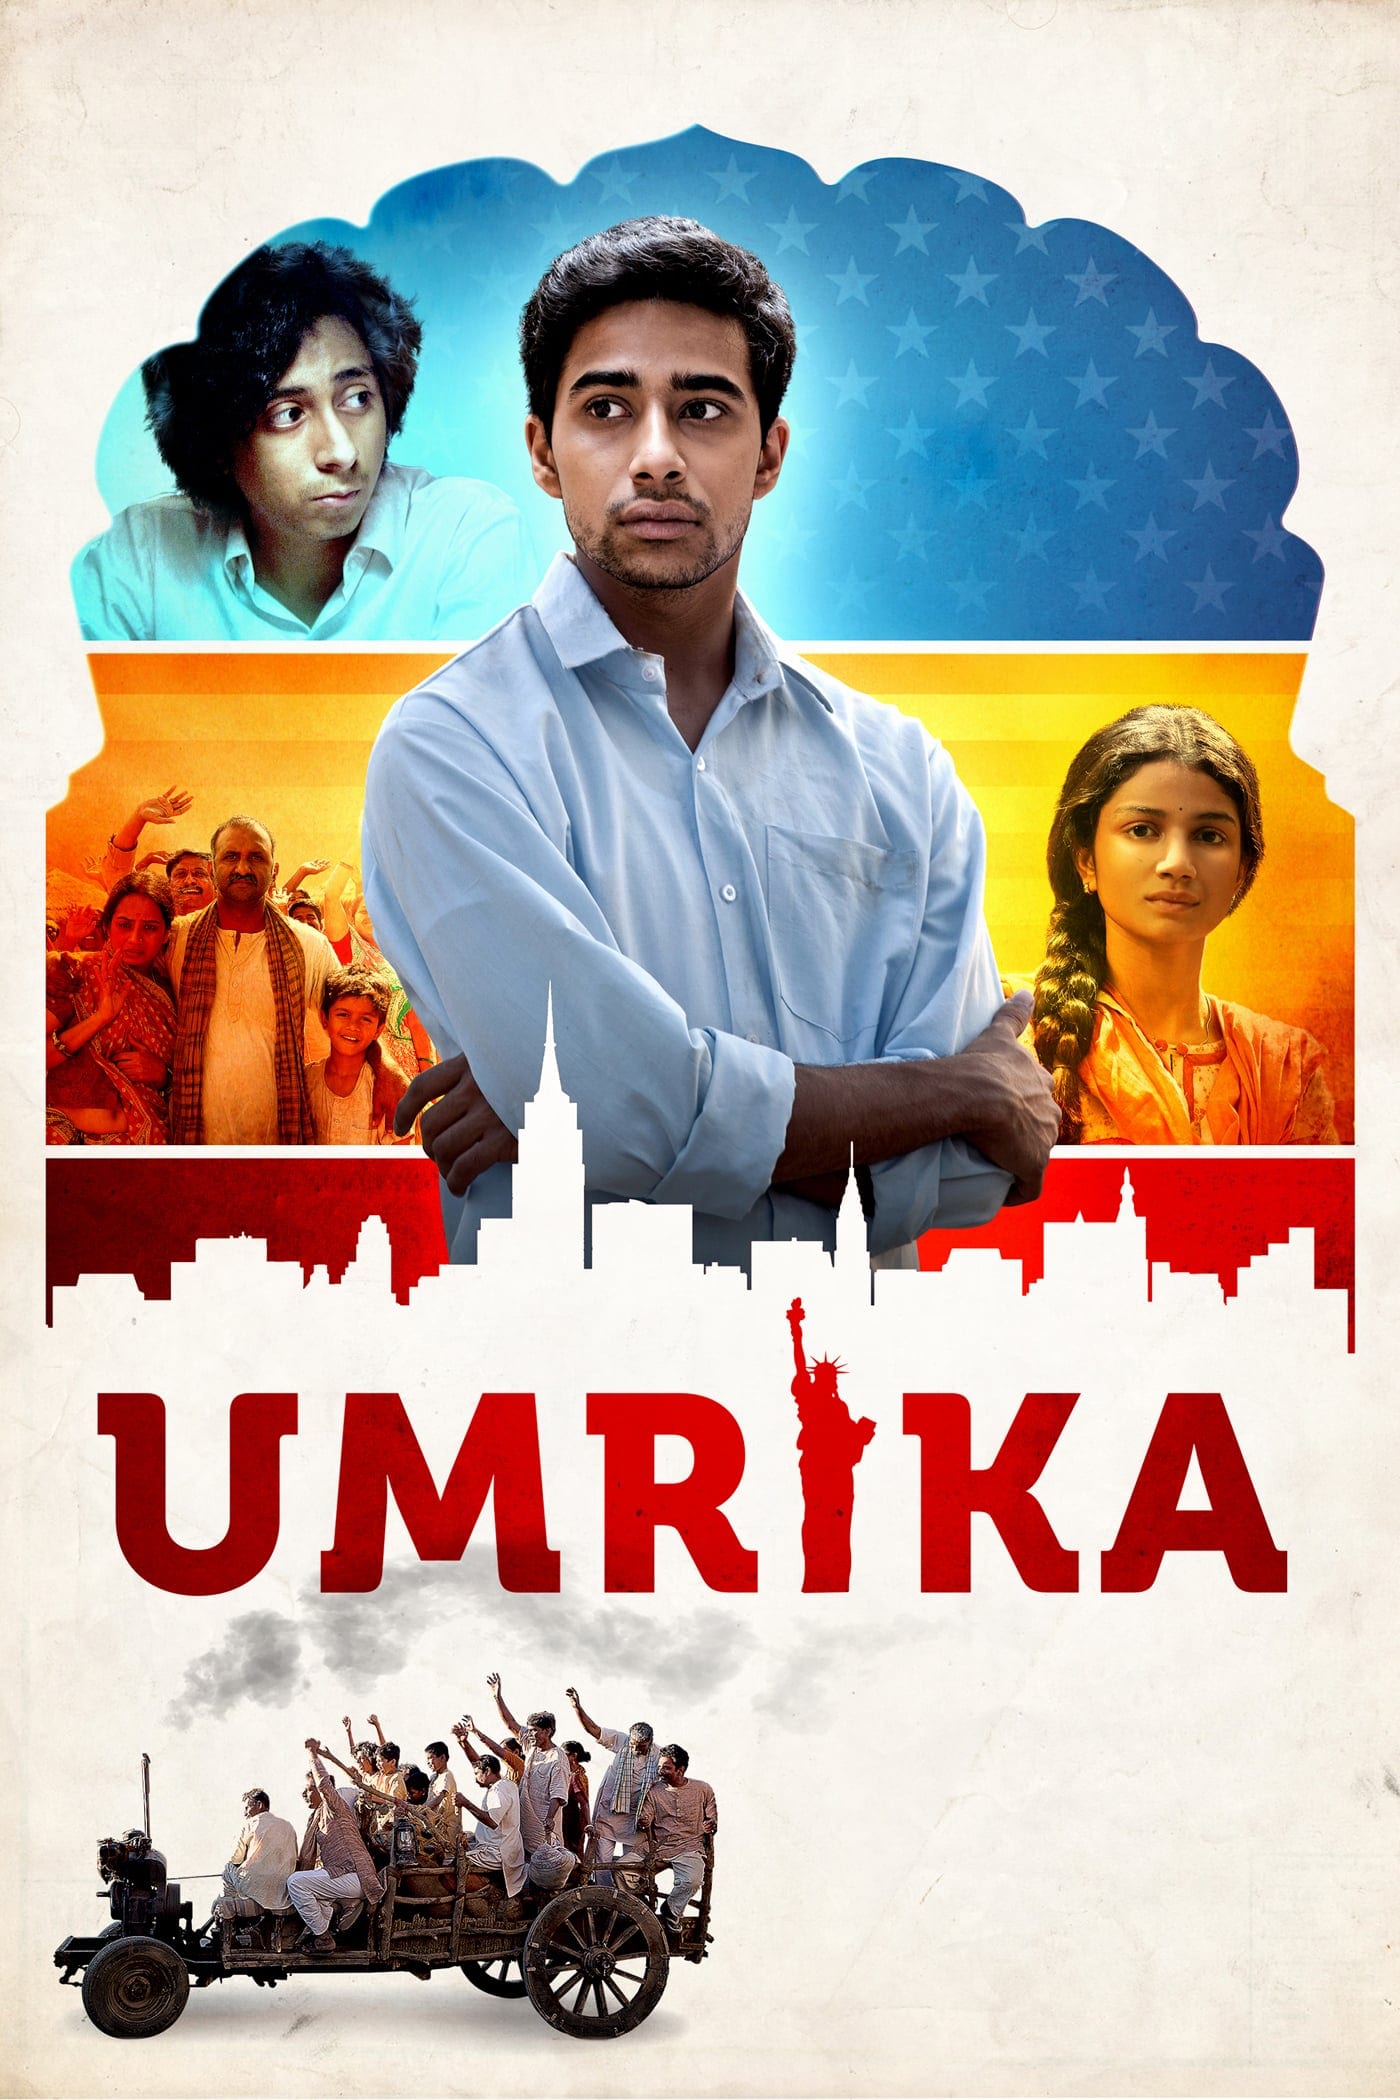 Poster for the movie "Umrika"